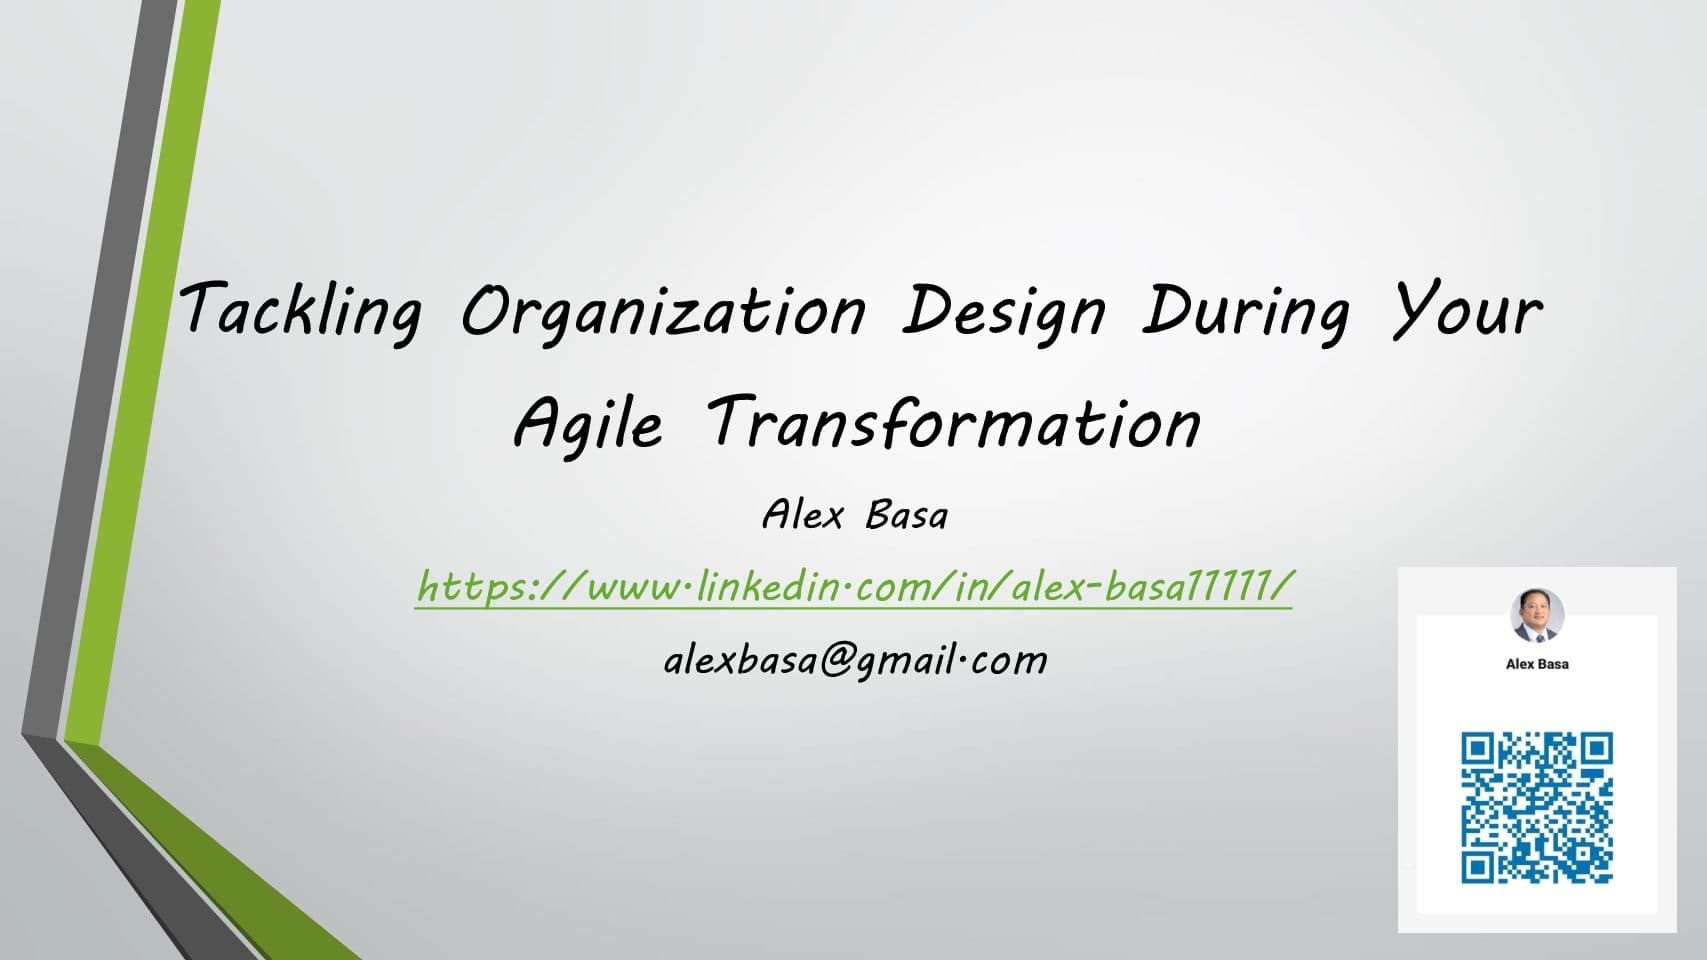 Tackling Organization Design During Our Agile Transformation